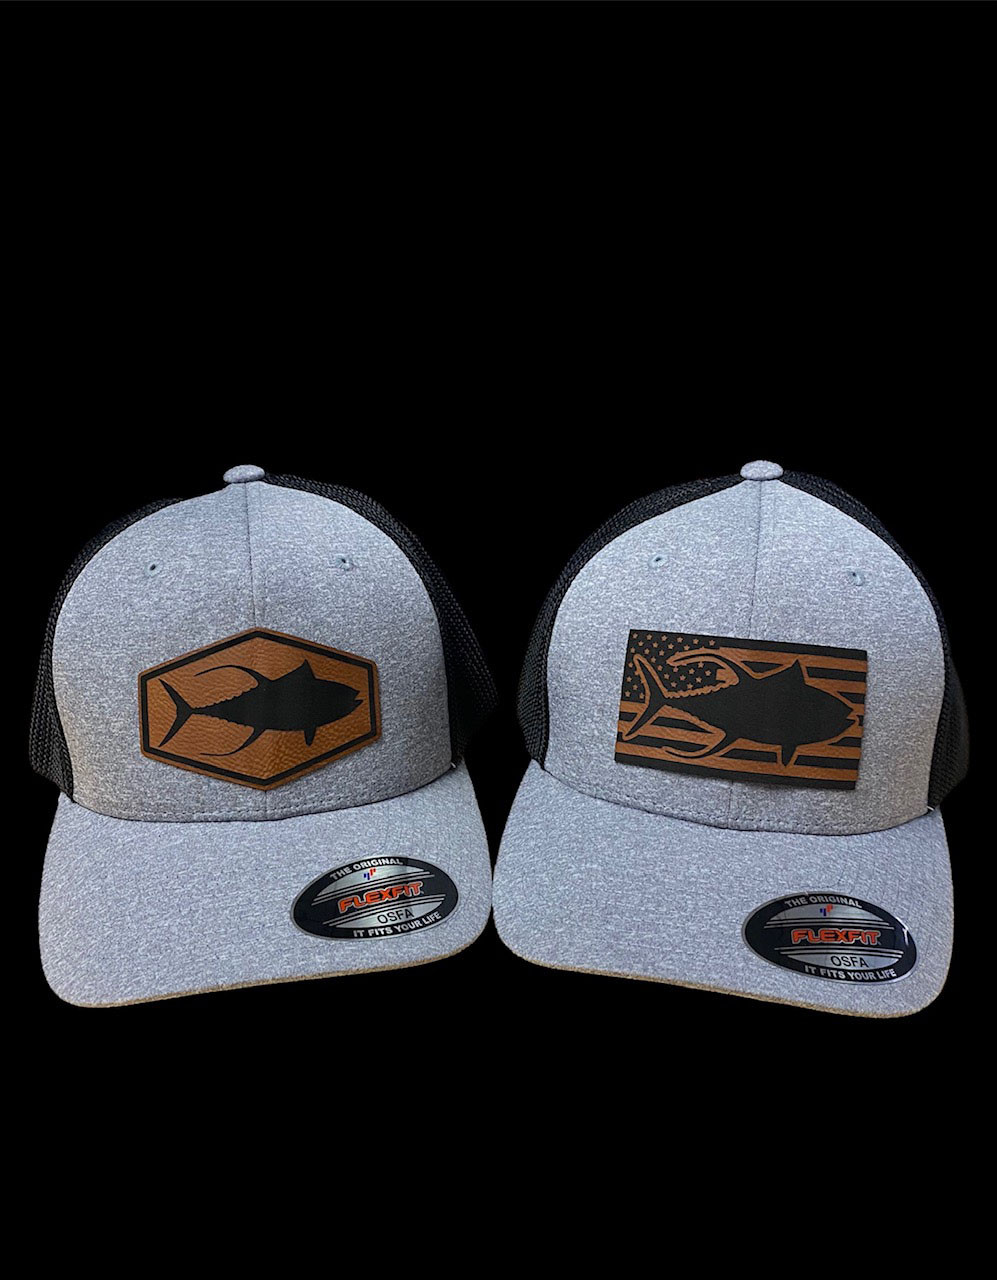 Mens gray with black mesh flex fit leather patch tuna hat or leather patch  tuna with american flag hat fishing hats or caps-made for fisherman